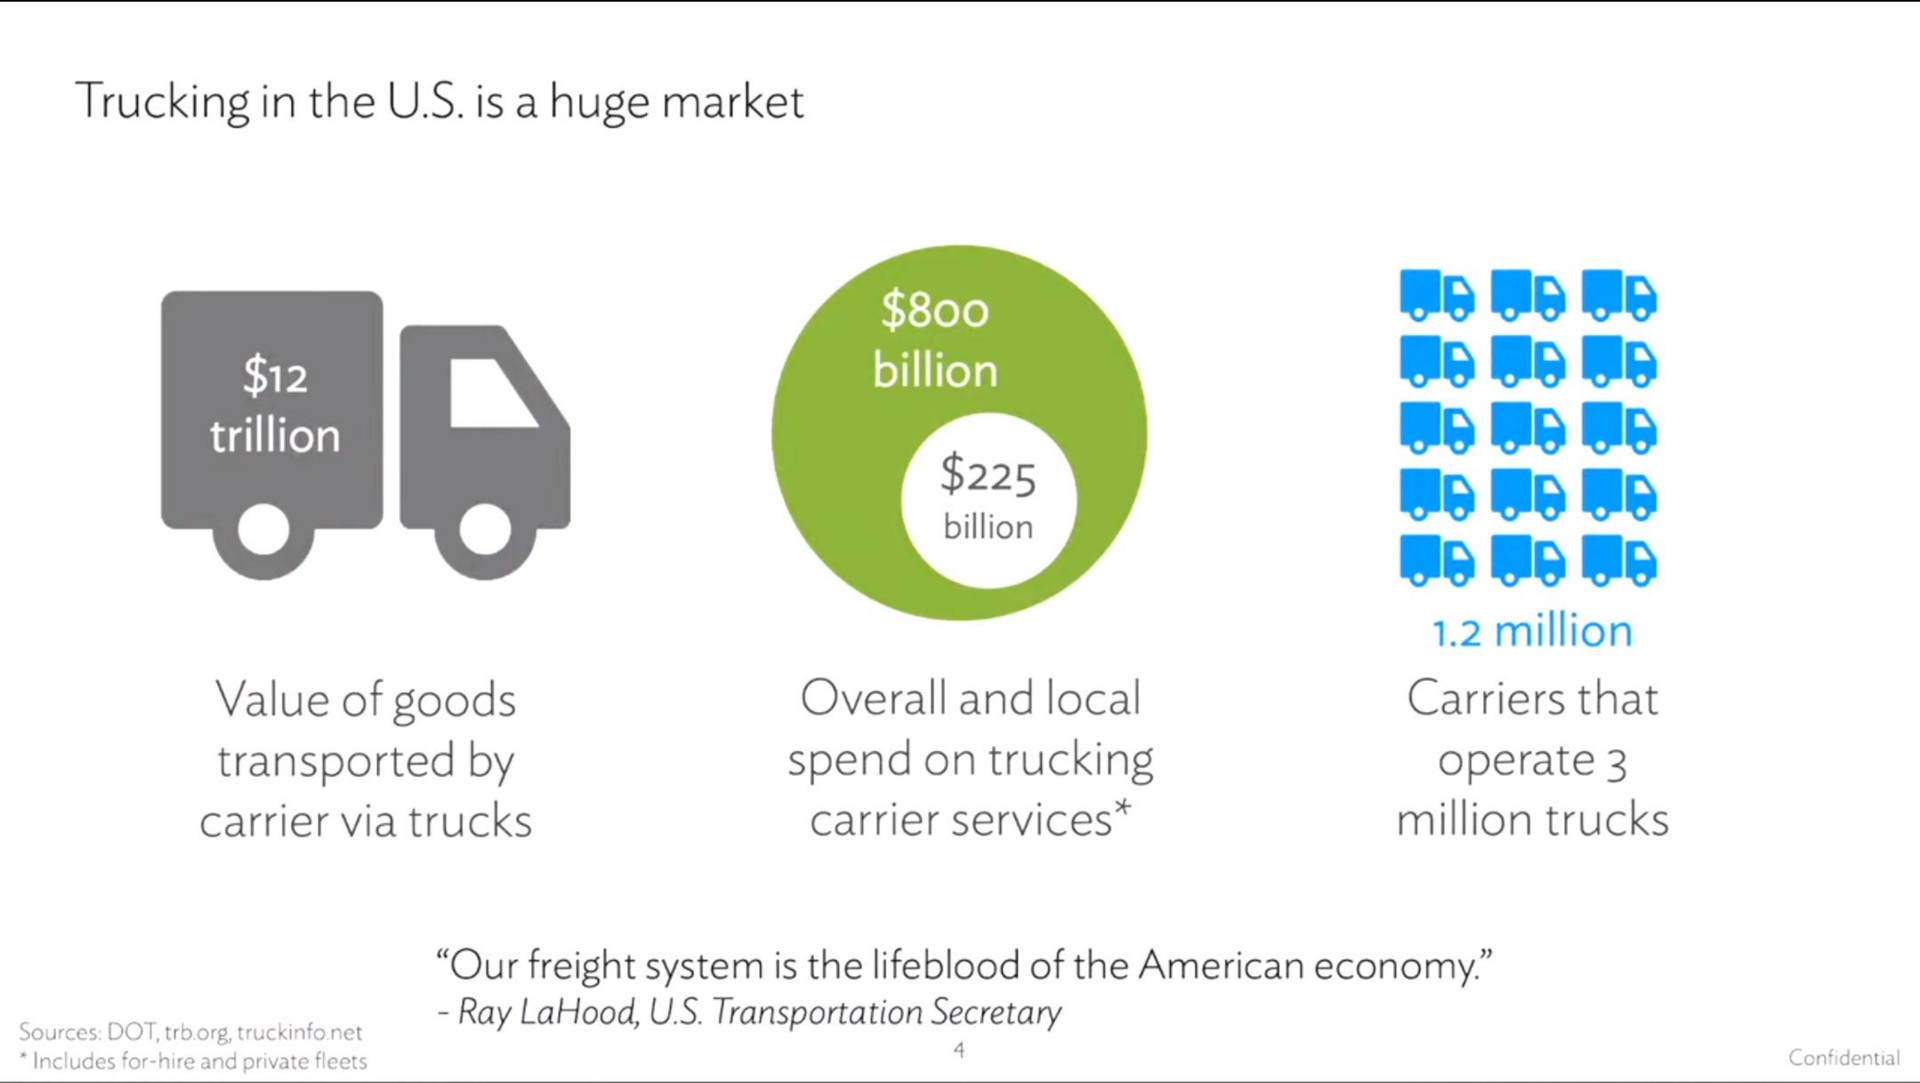 trucking in the is a huge market trillion billion value of goods carrier via trucks overall and local carrier services its be be git be carriers that million trucks | Convoy